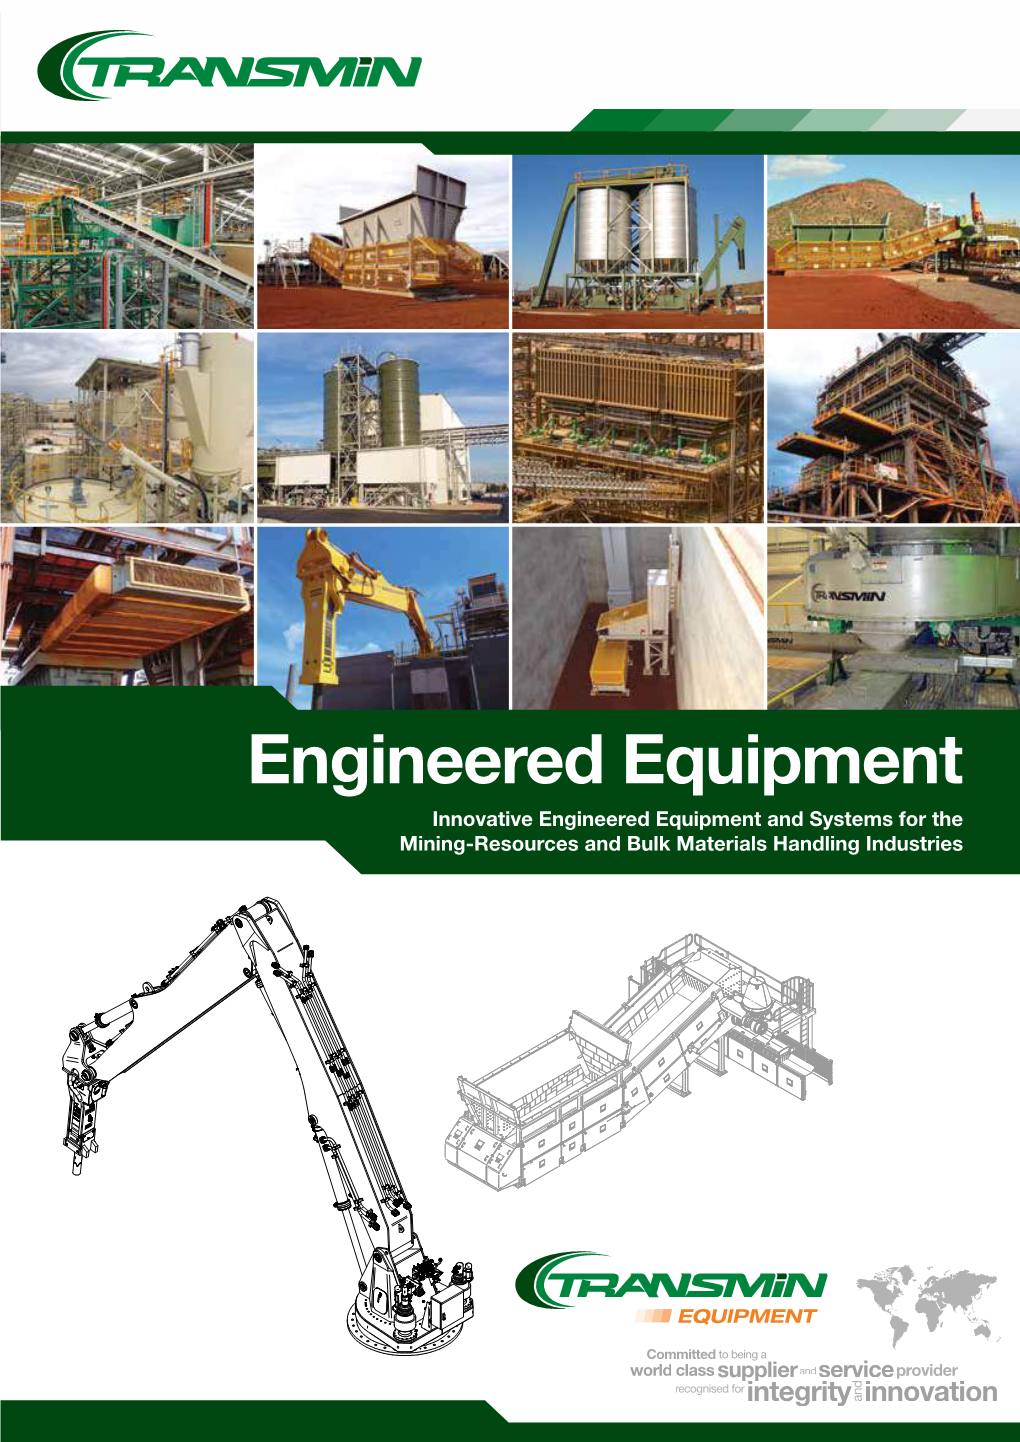 Engineered Equipment Innovative Engineered Equipment and Systems for the Mining-Resources and Bulk Materials Handling Industries